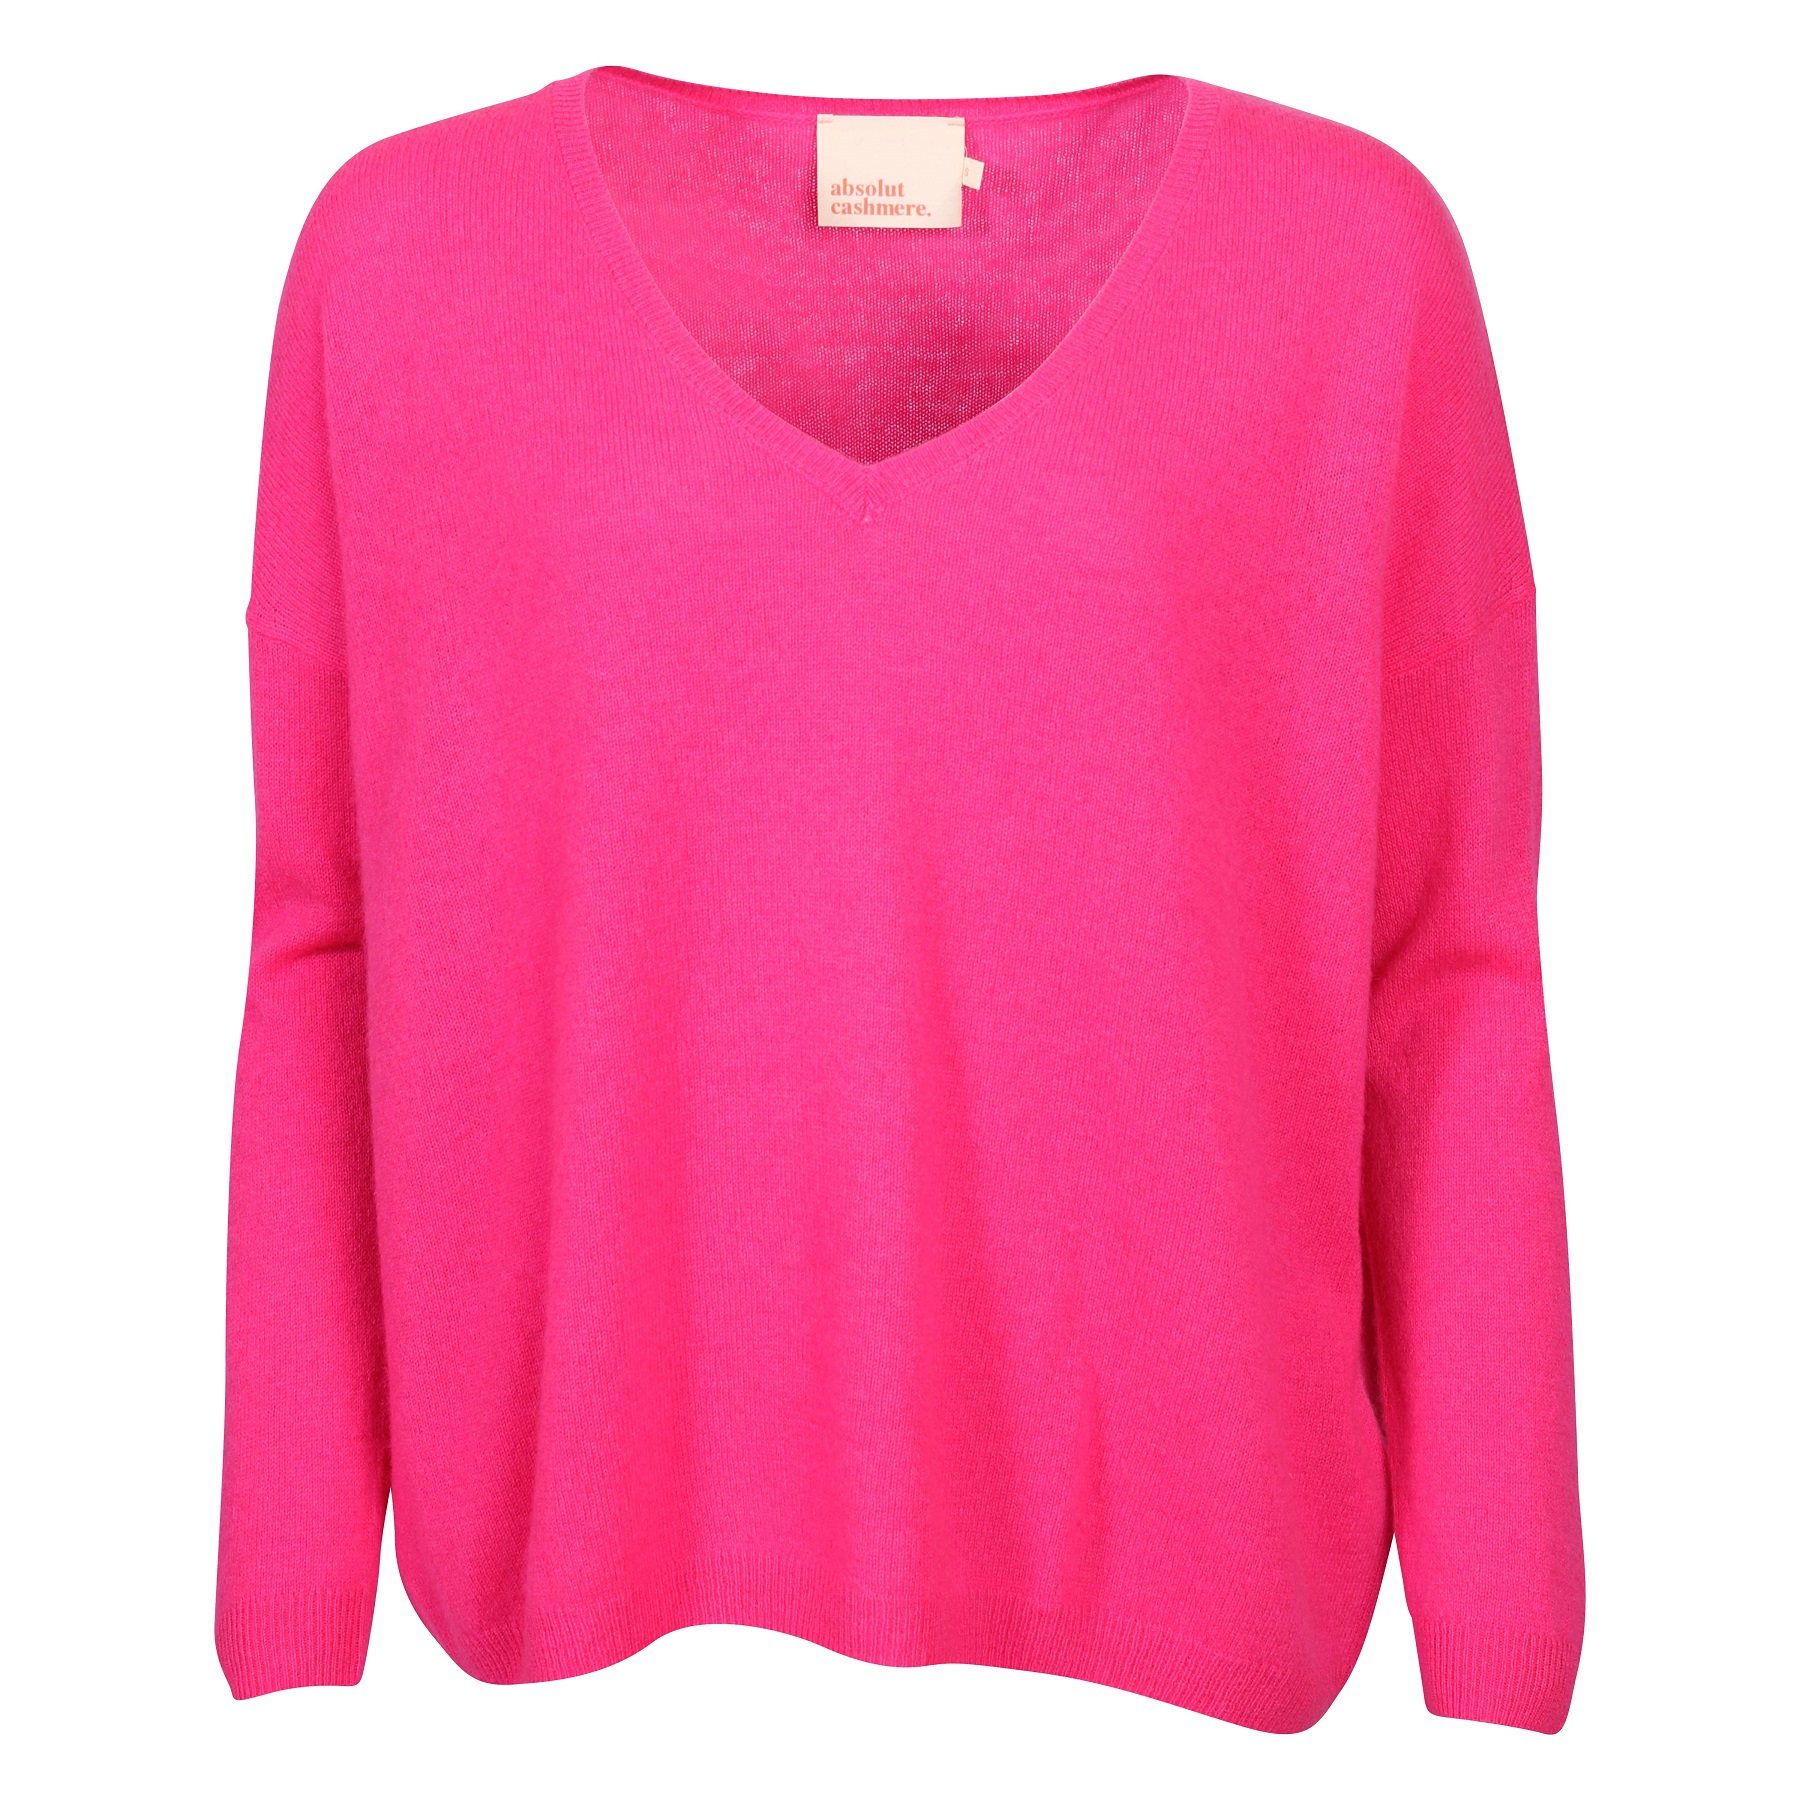 Absolut Cashmere Pullover Angele in Pink M